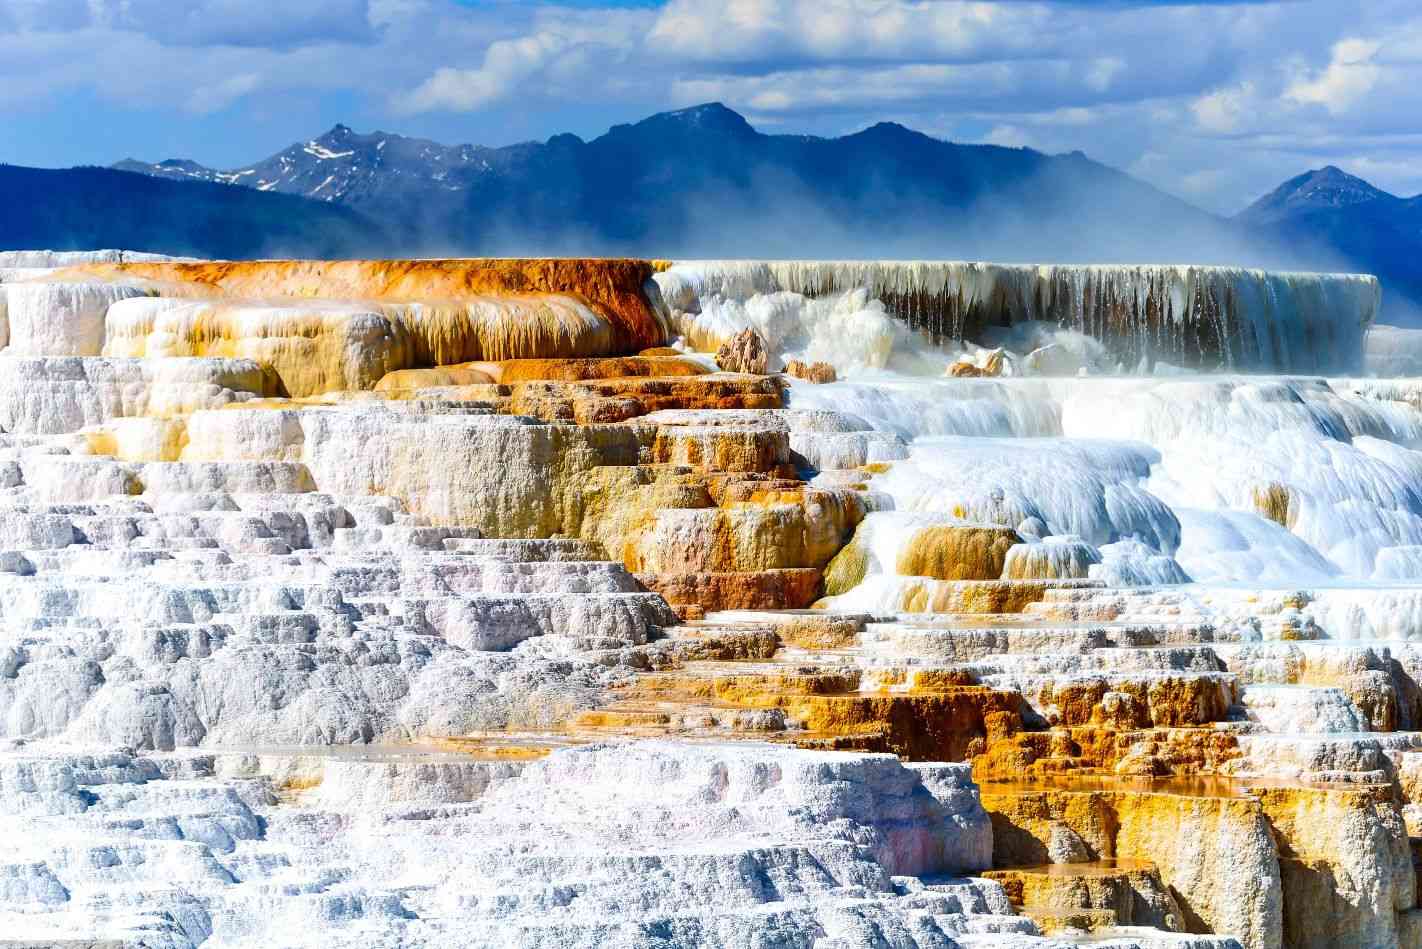 Does Yellowstone have guided tours?